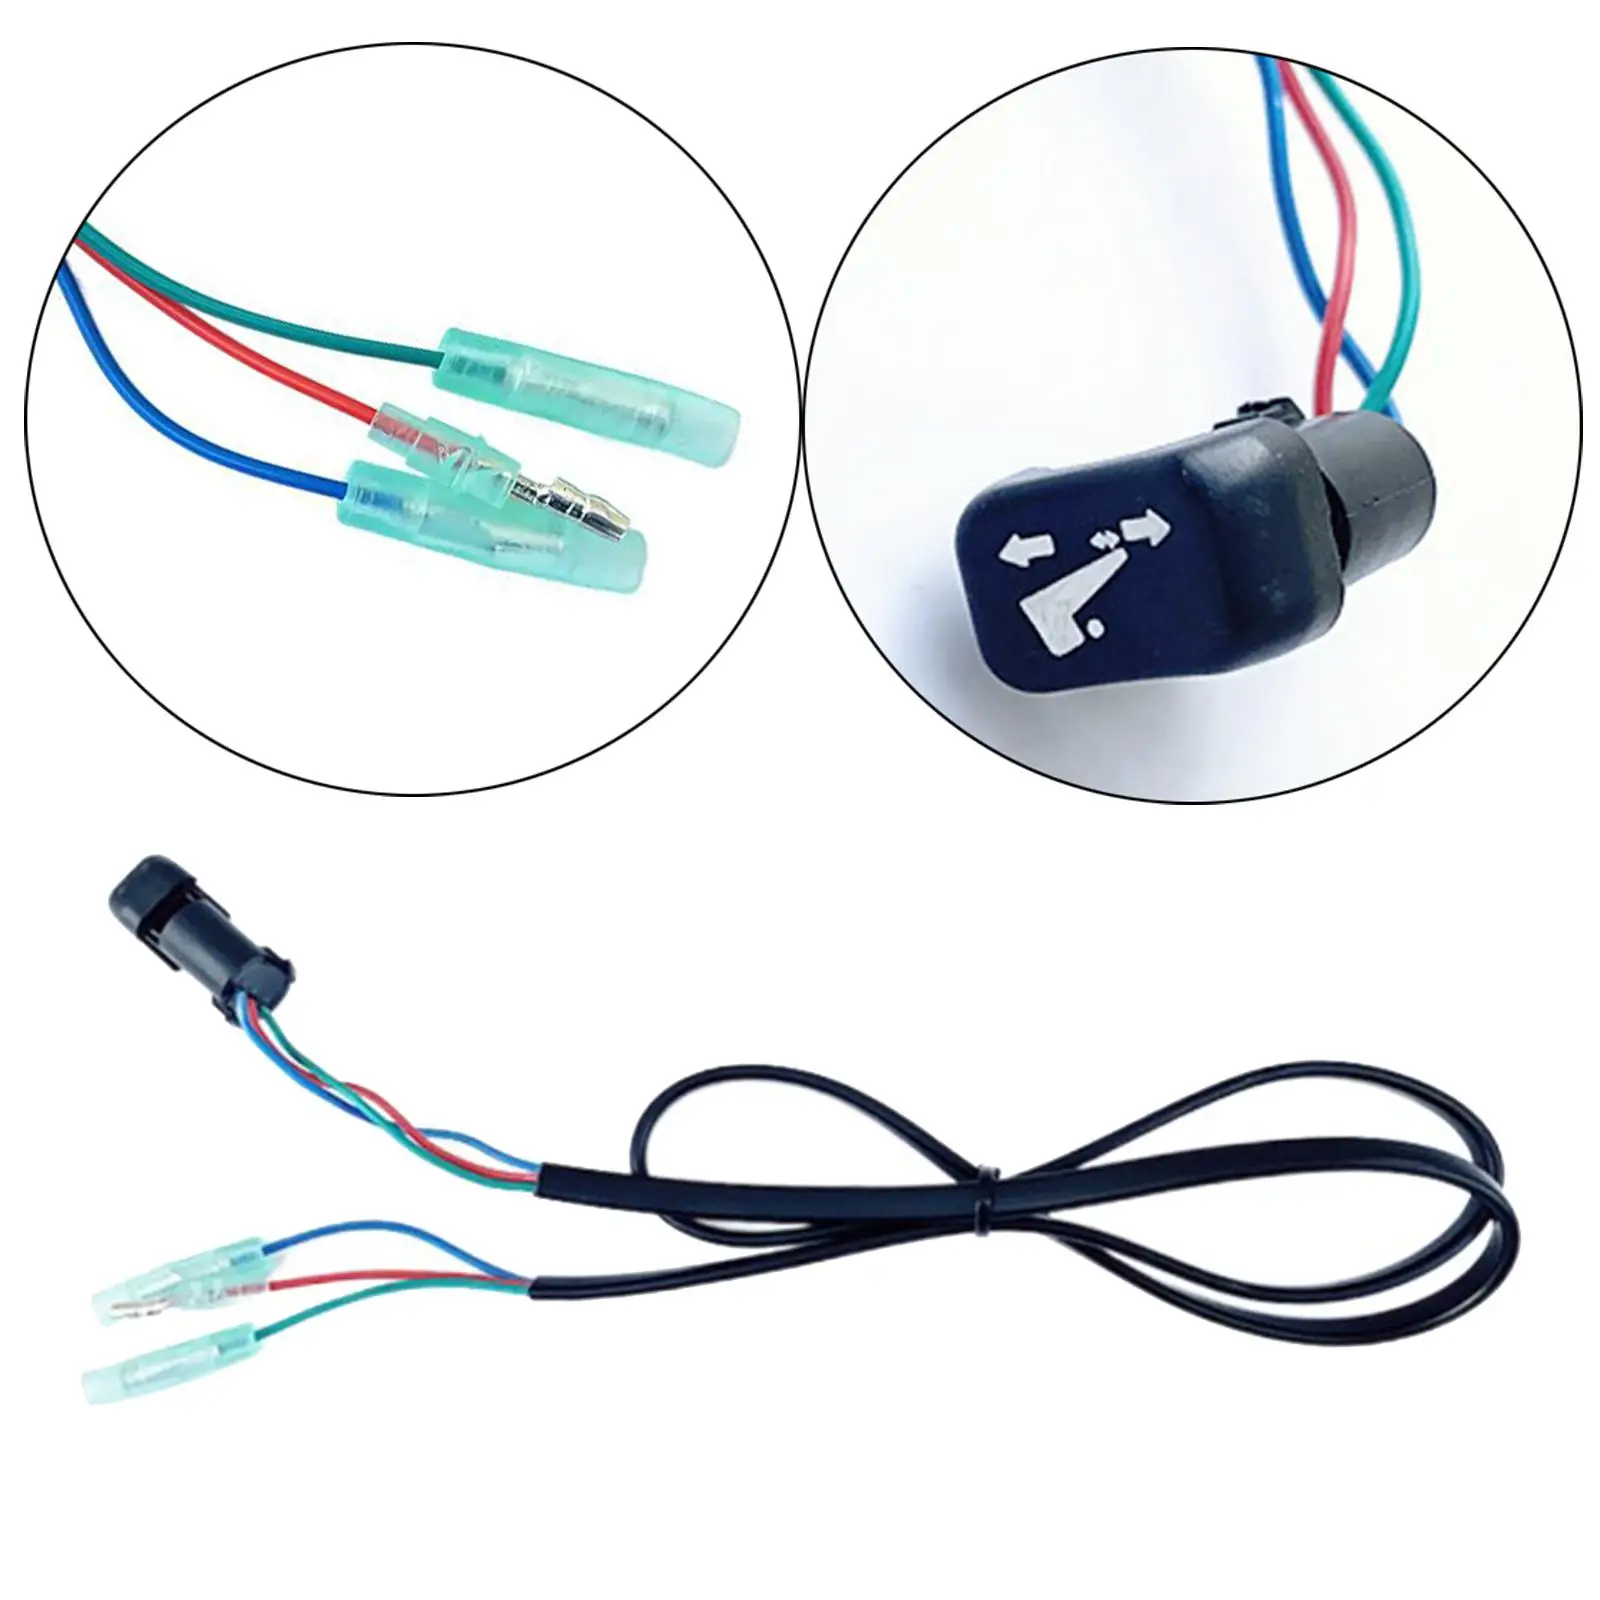 1 Piece 37850-93J10 Durable Tilt Switch Remote Control Box Outboard & Tilt Switch for Suzuki Marine Outboard